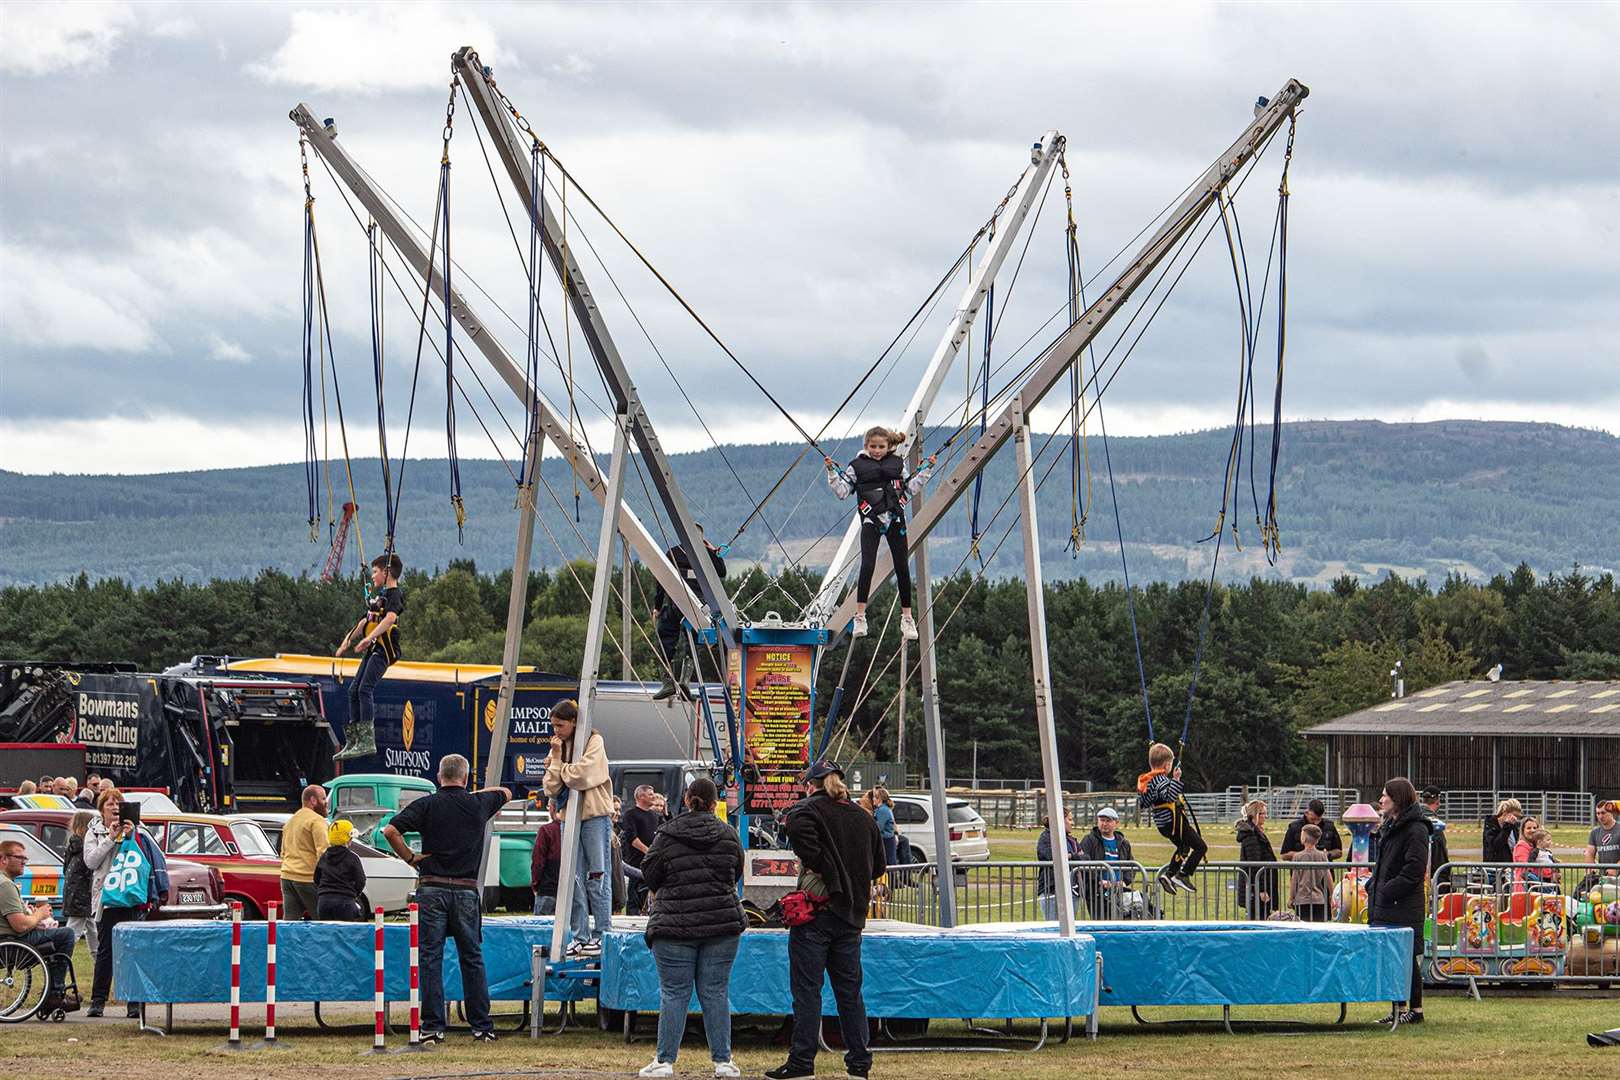 There was plenty for everyone to do on the day, including rides for the kids. Photo: Niall Harkiss